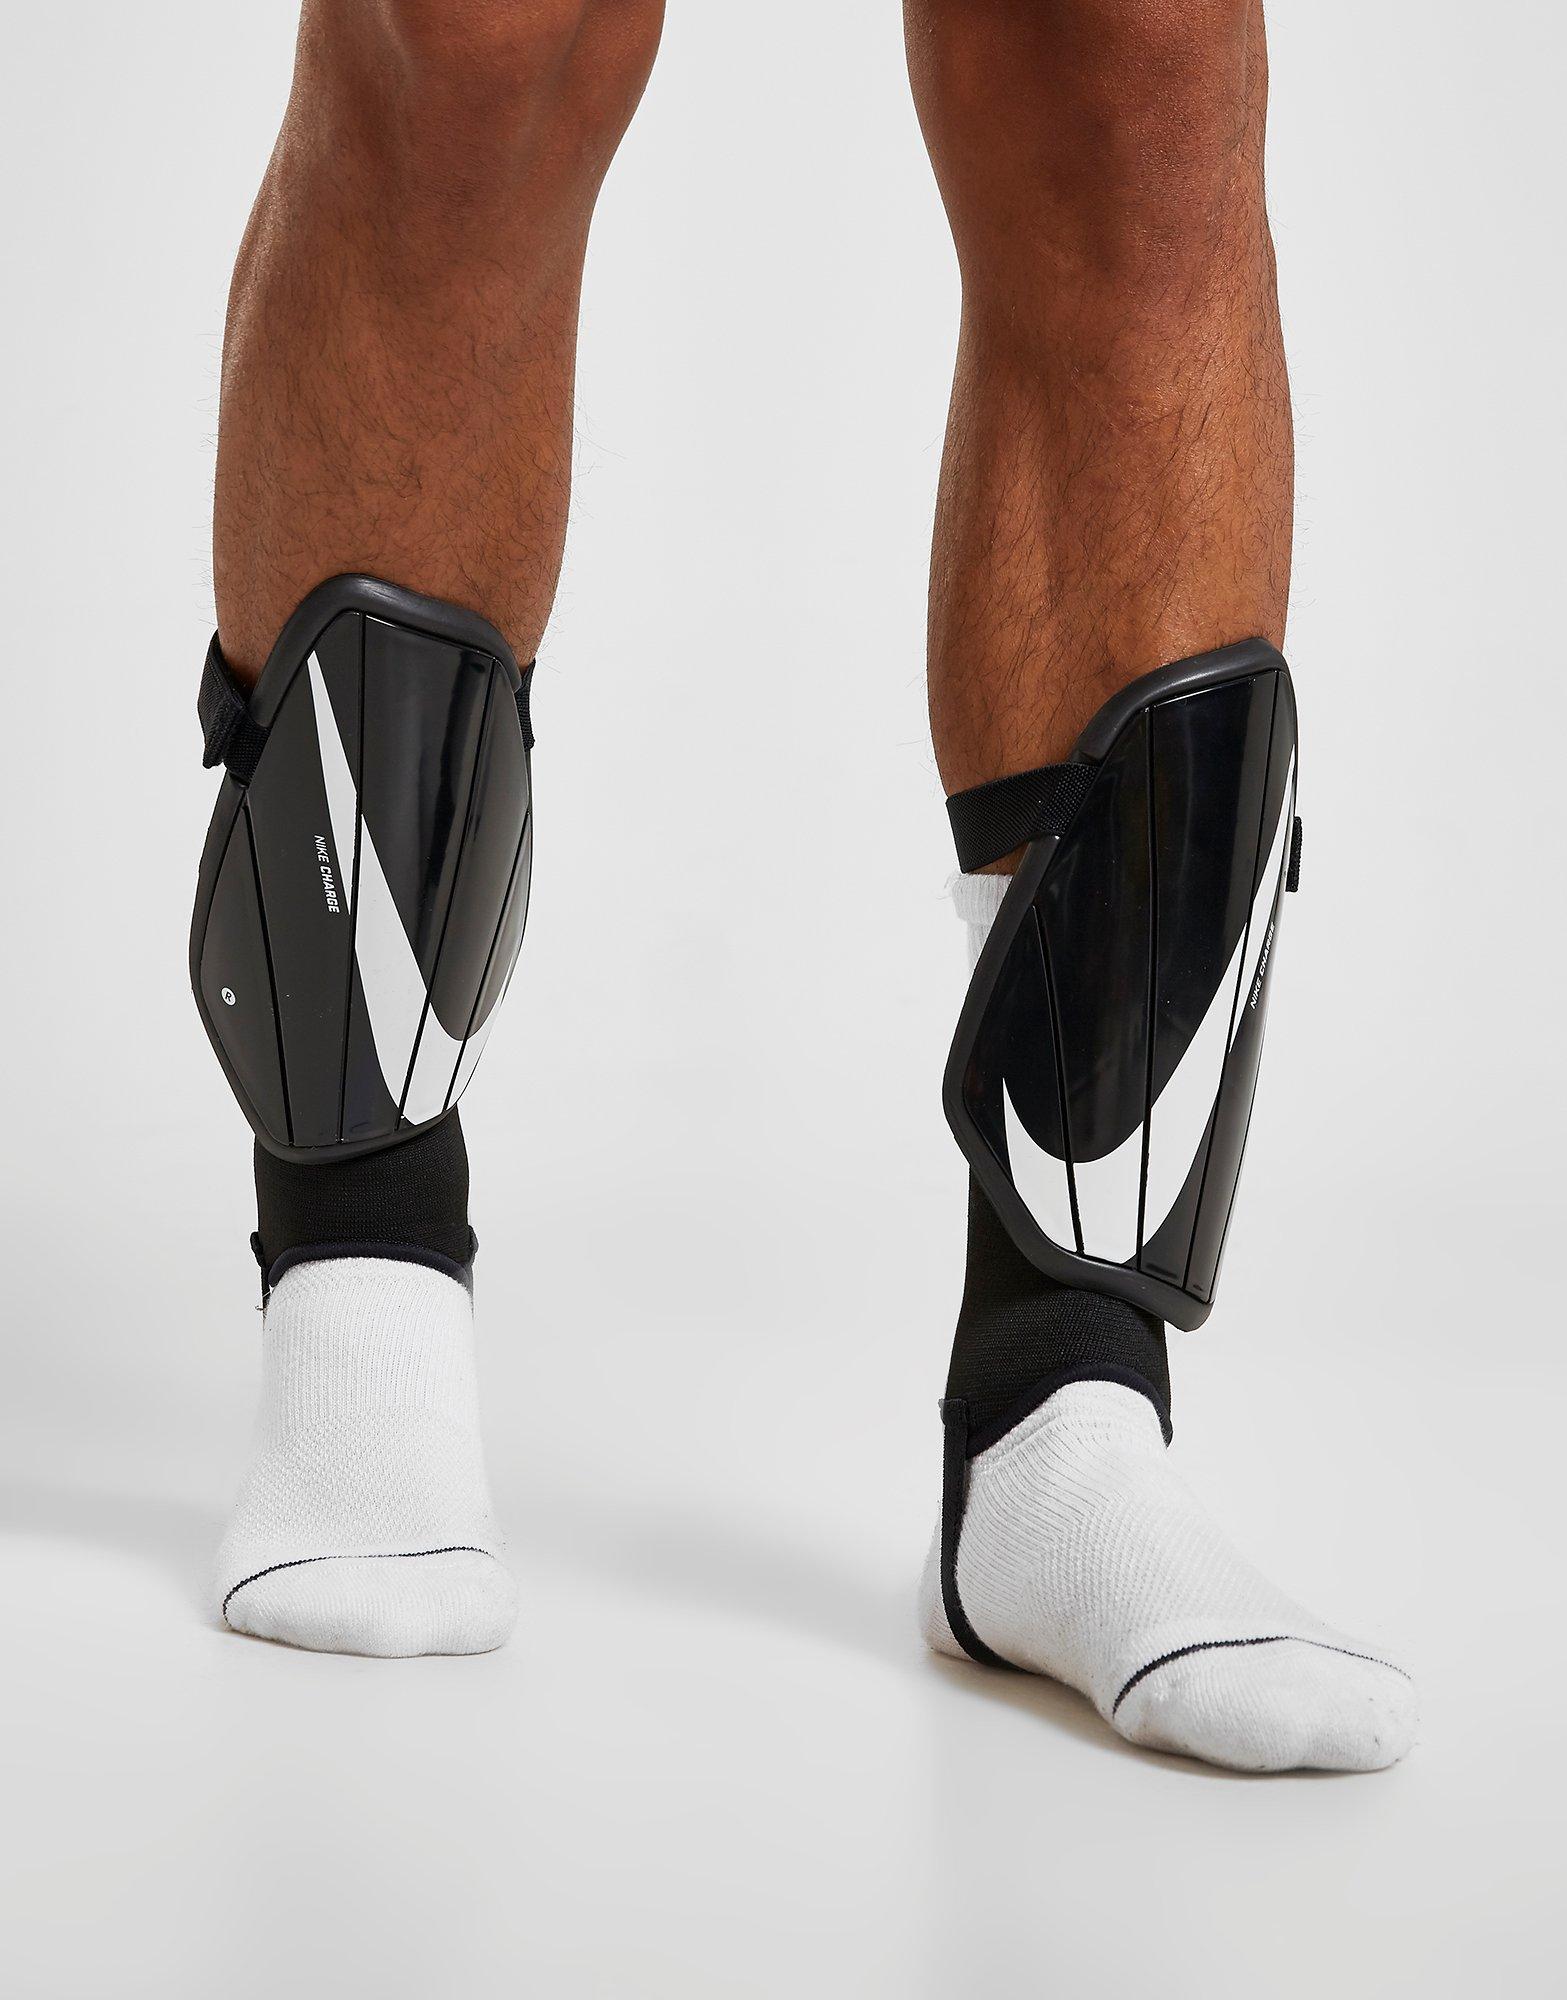 nike shin pads with ankle support